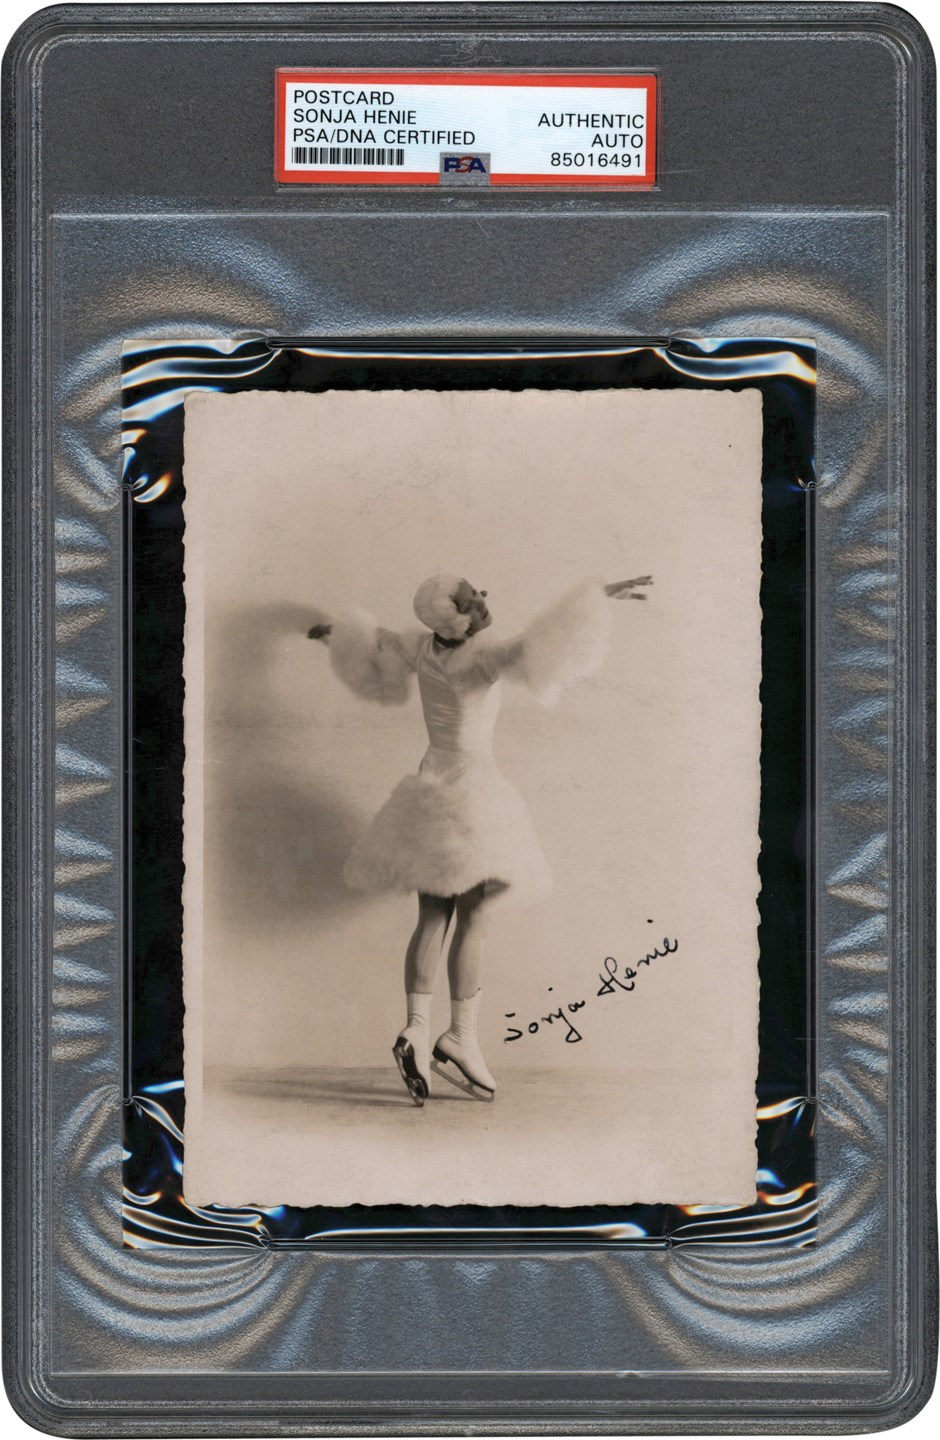 Olympics and All Sports - Beautiful Sonja Henie Vintage Signed Real Photo Postcard (PSA)